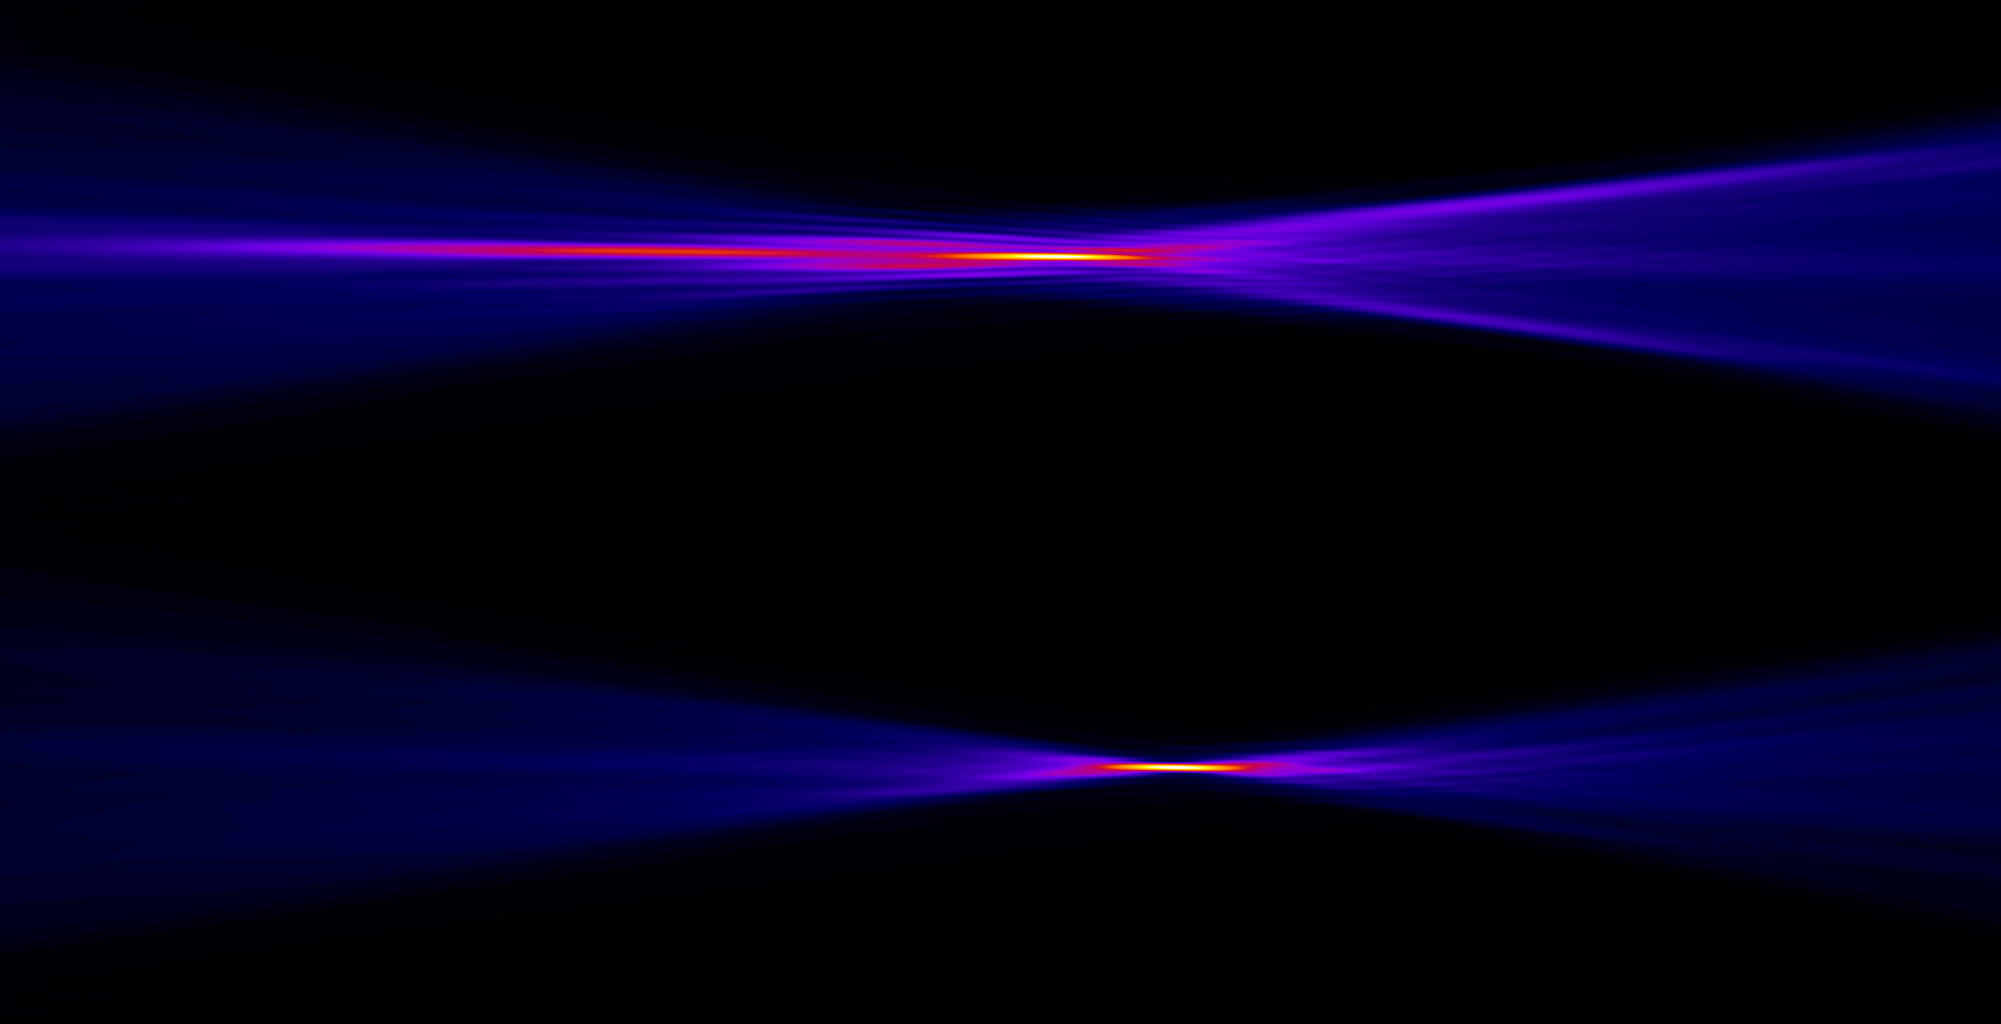 Profile of the focused X-ray beam